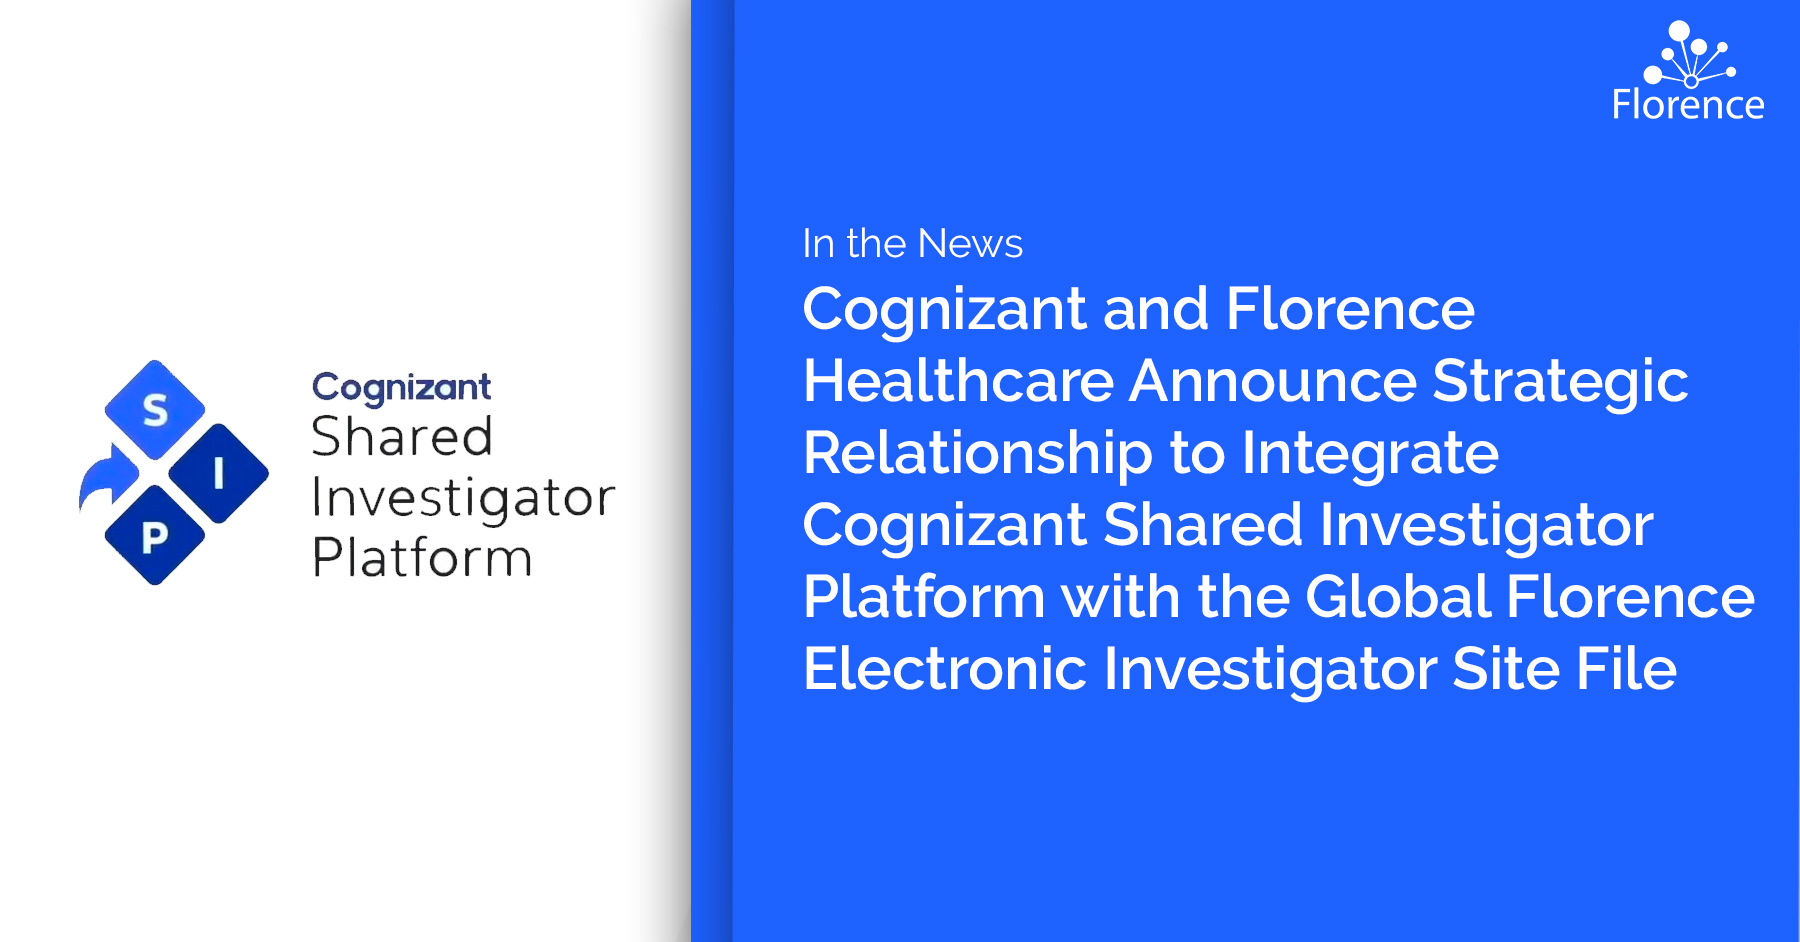 Florence and Cognizant Shared Invesitgator Platform